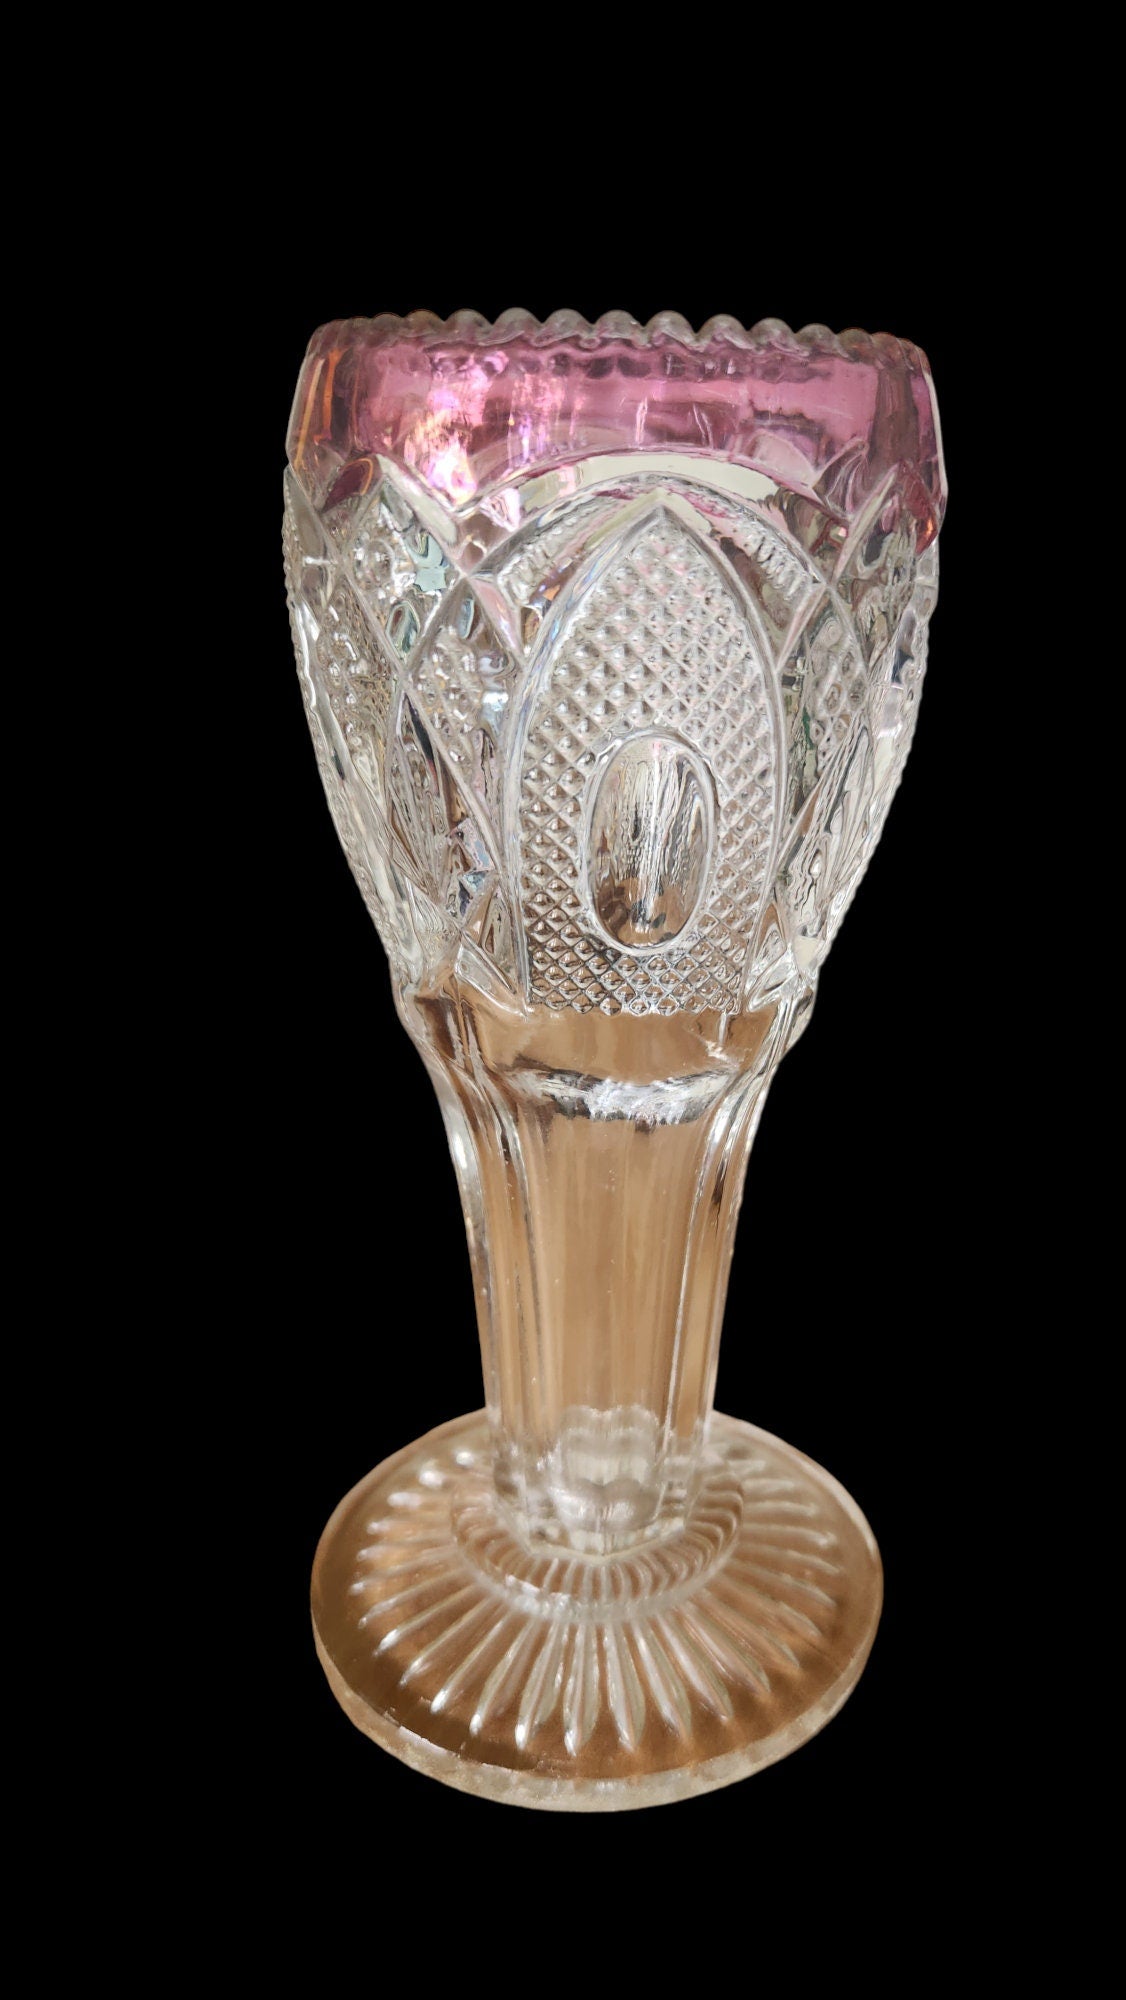 Antique Bud Vase, Early American Pressed Glass